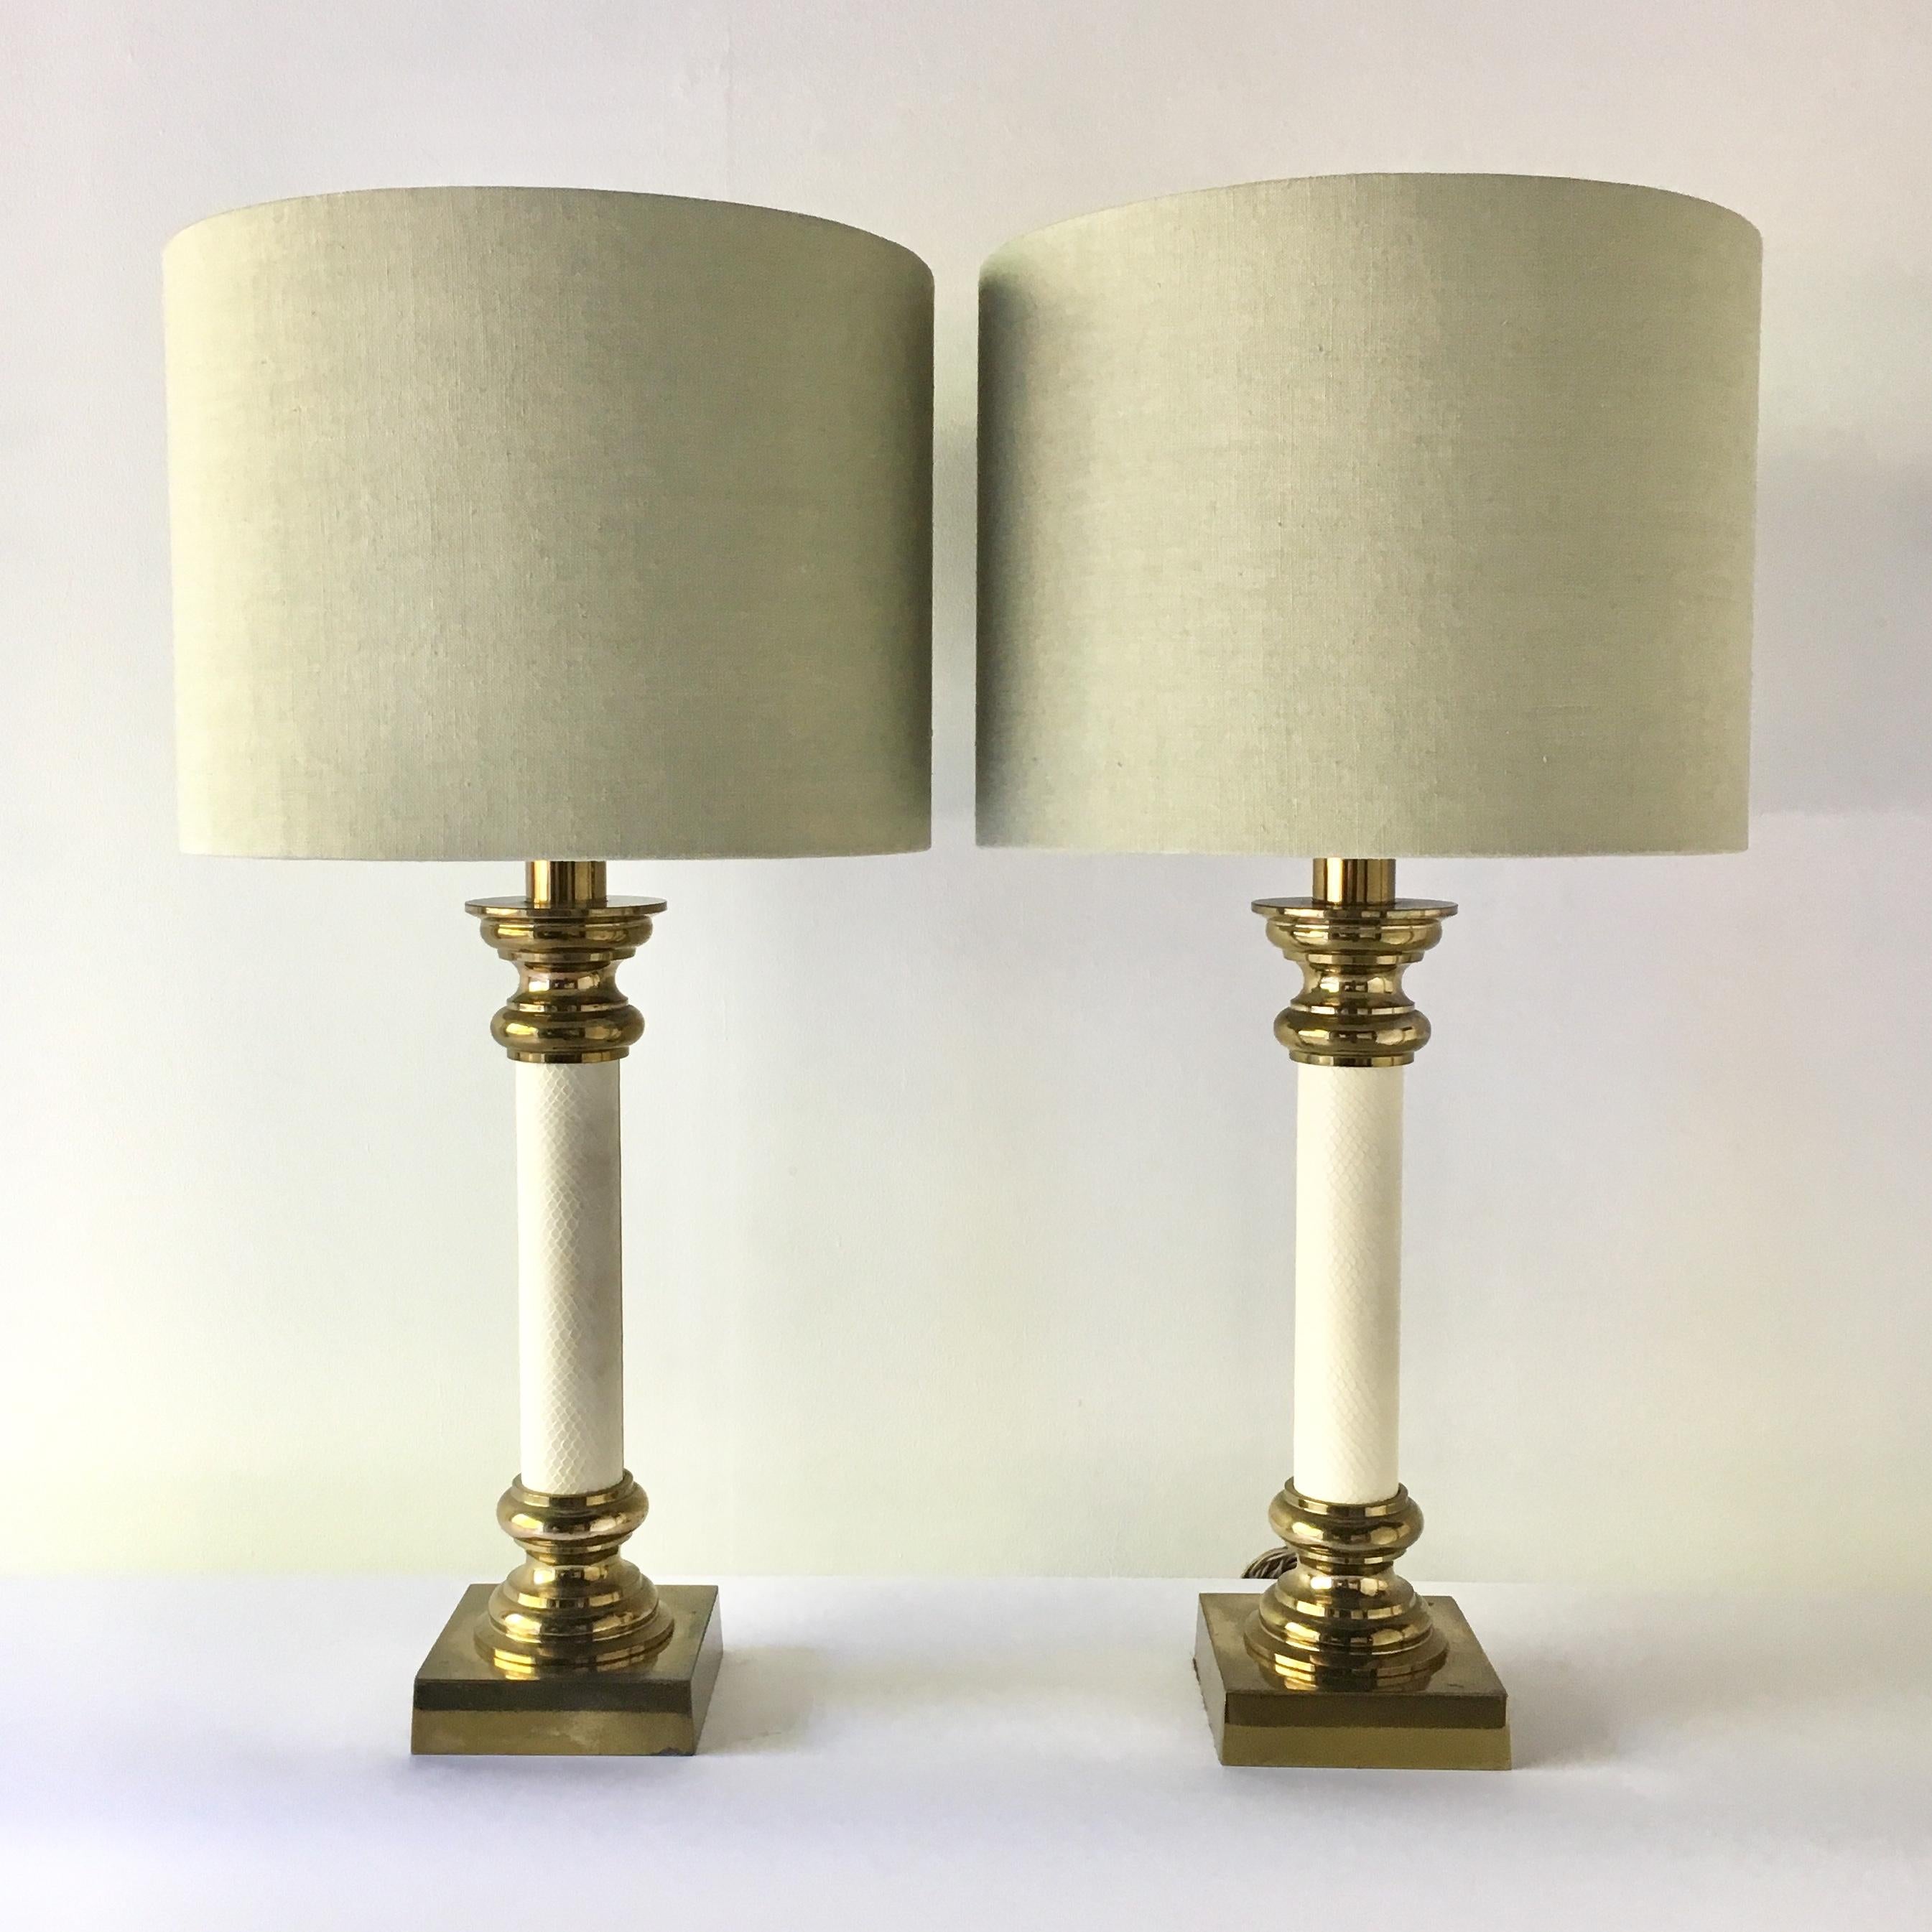 American Pair of Rembrandt Brass and Faux Snakeskin Table Lamps, 1960s